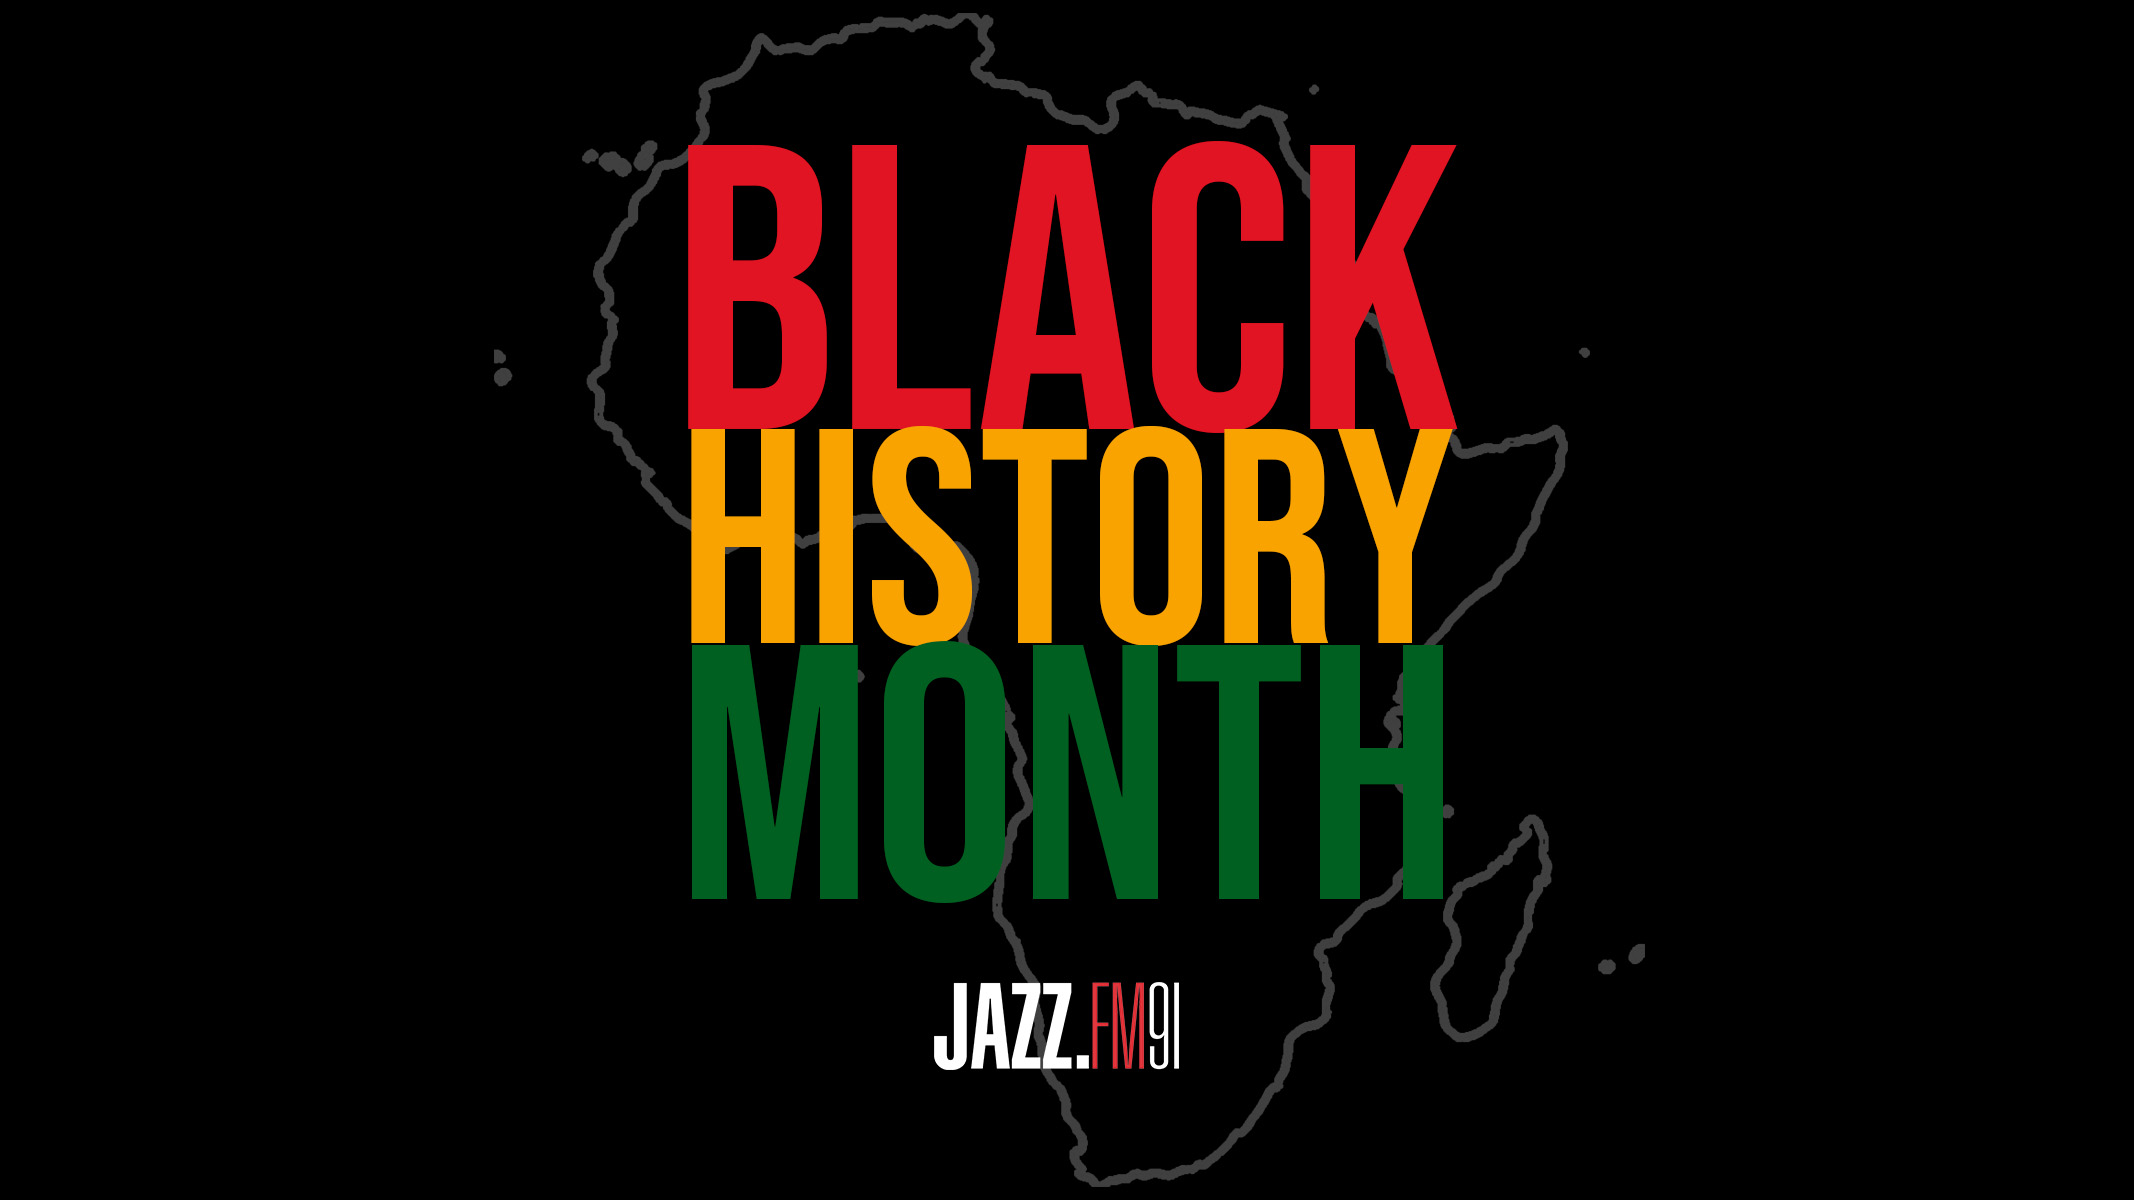 Black History Month: Honouring the Past, Inspiring the Future